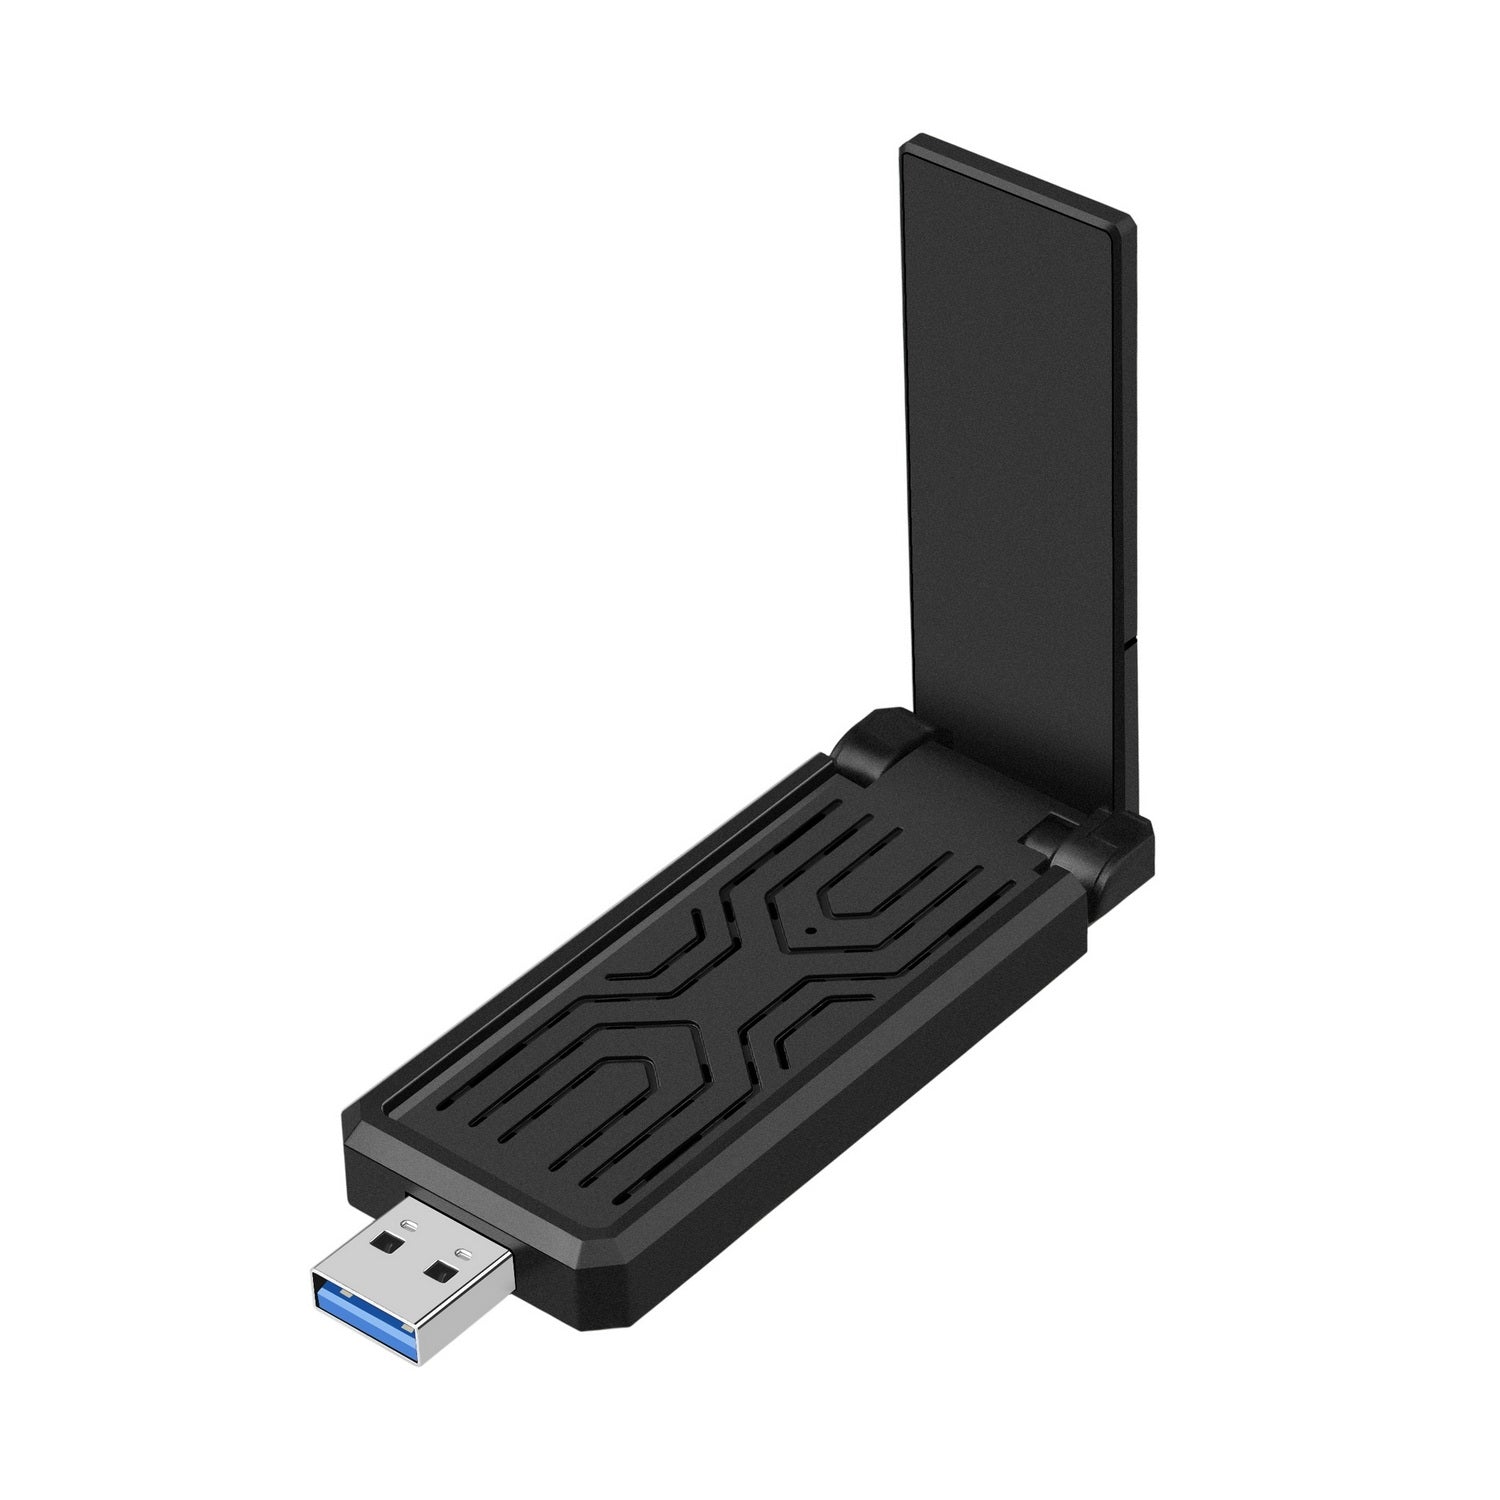 NW812 AX1800 Dual Band WiFi 6 USB Adapter with Foldable Antenna